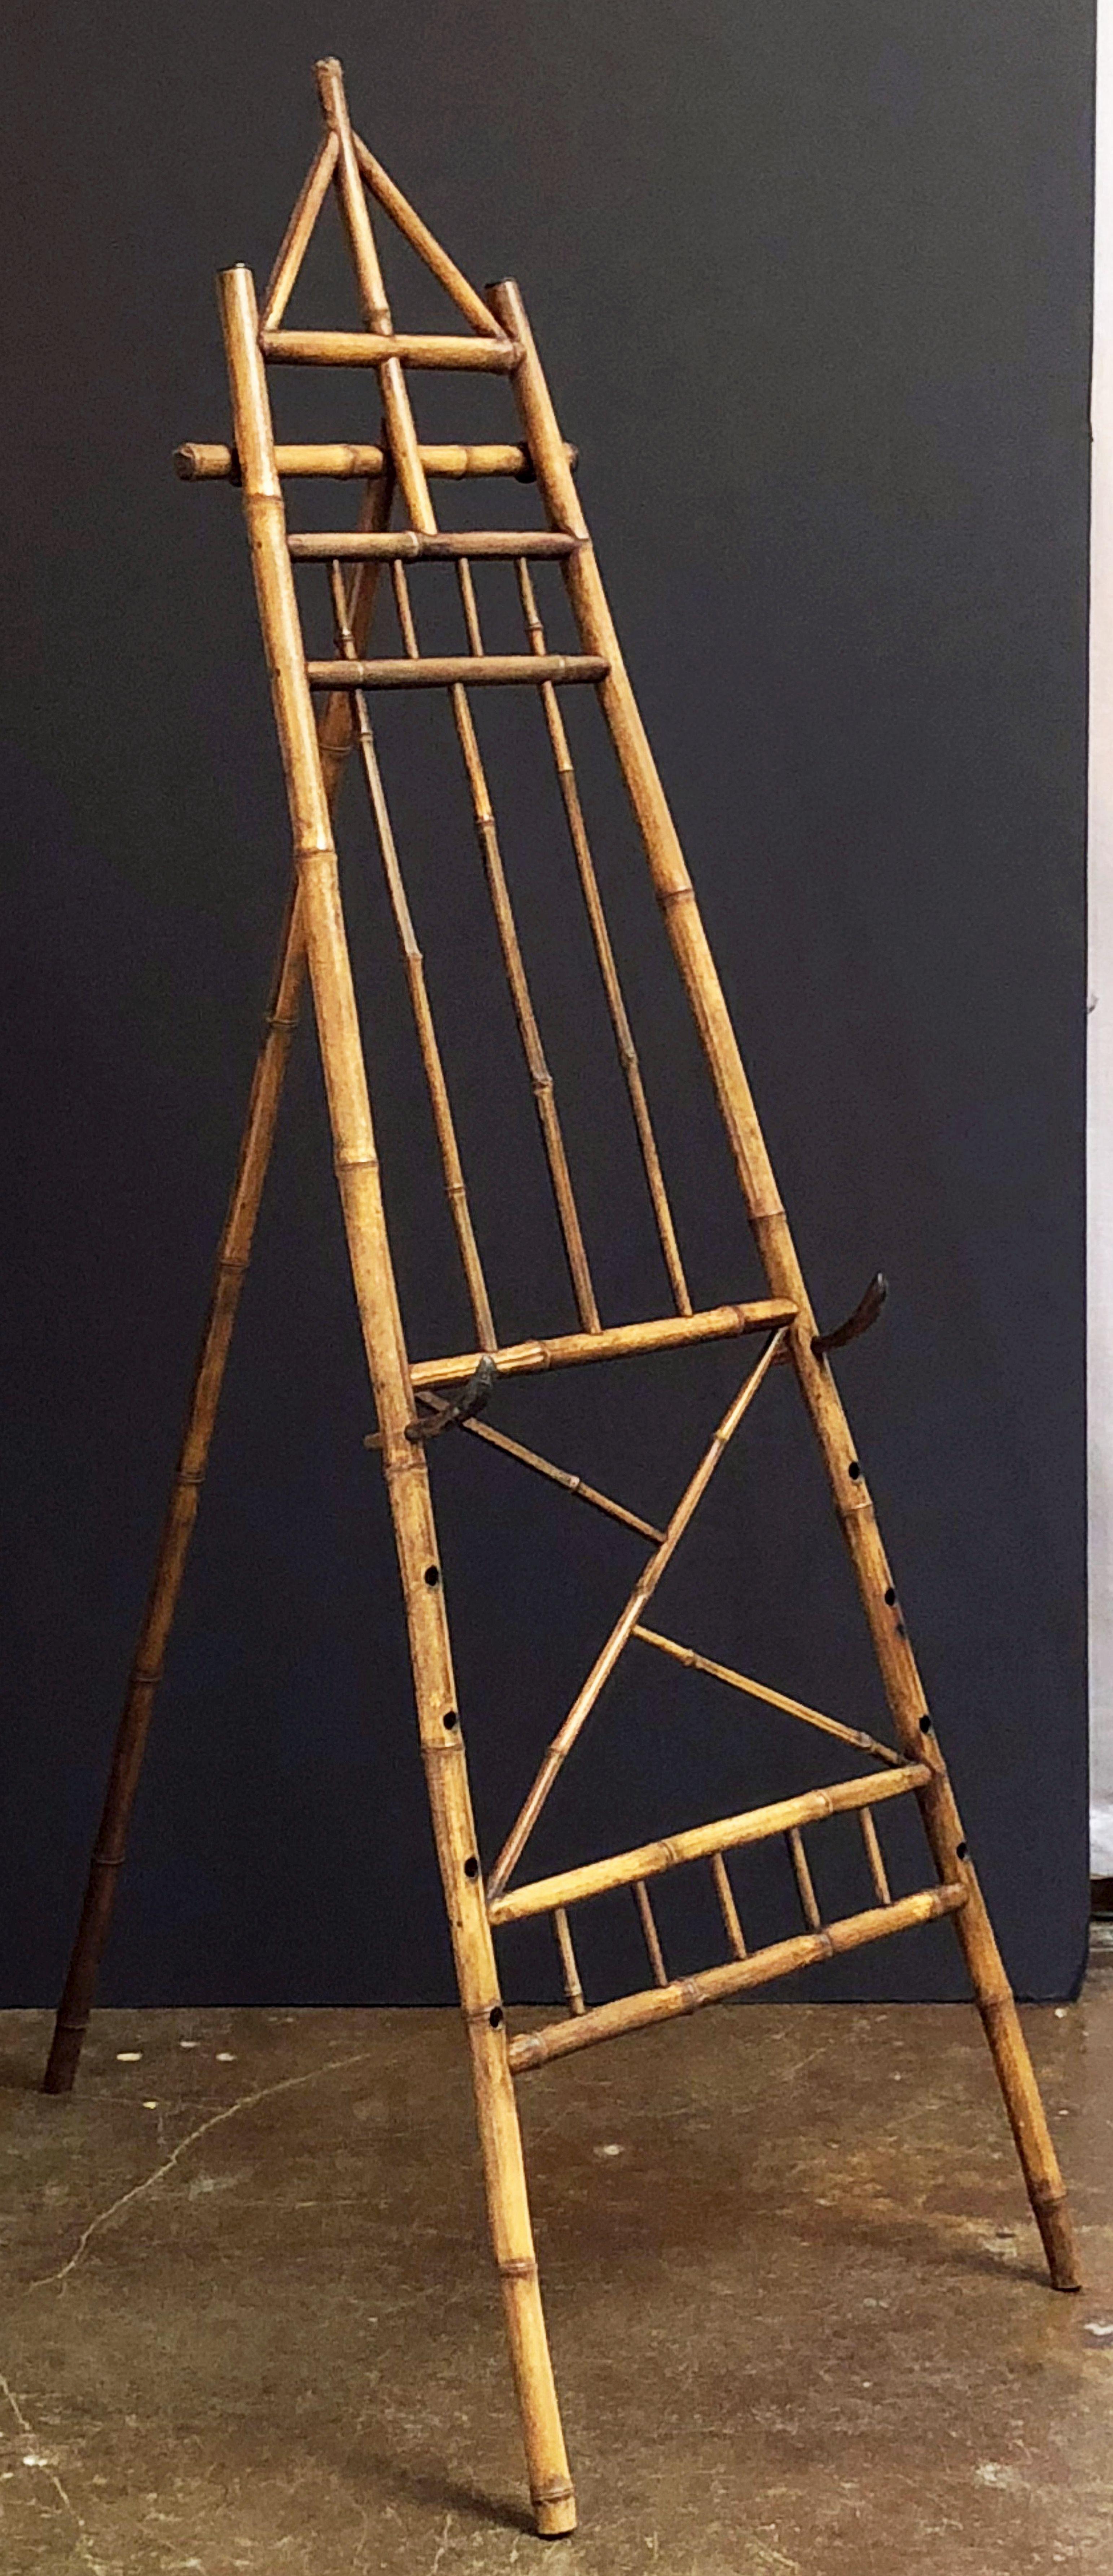 A Fine English bamboo display or artist's easel, from the Aesthetic Movement period, featuring a handsomely patinated frame with adjustable bamboo pegs for supporting framed art.

Dimensions: H 79 inches x W 26 1/4 inches x D 45 3/4 inches.